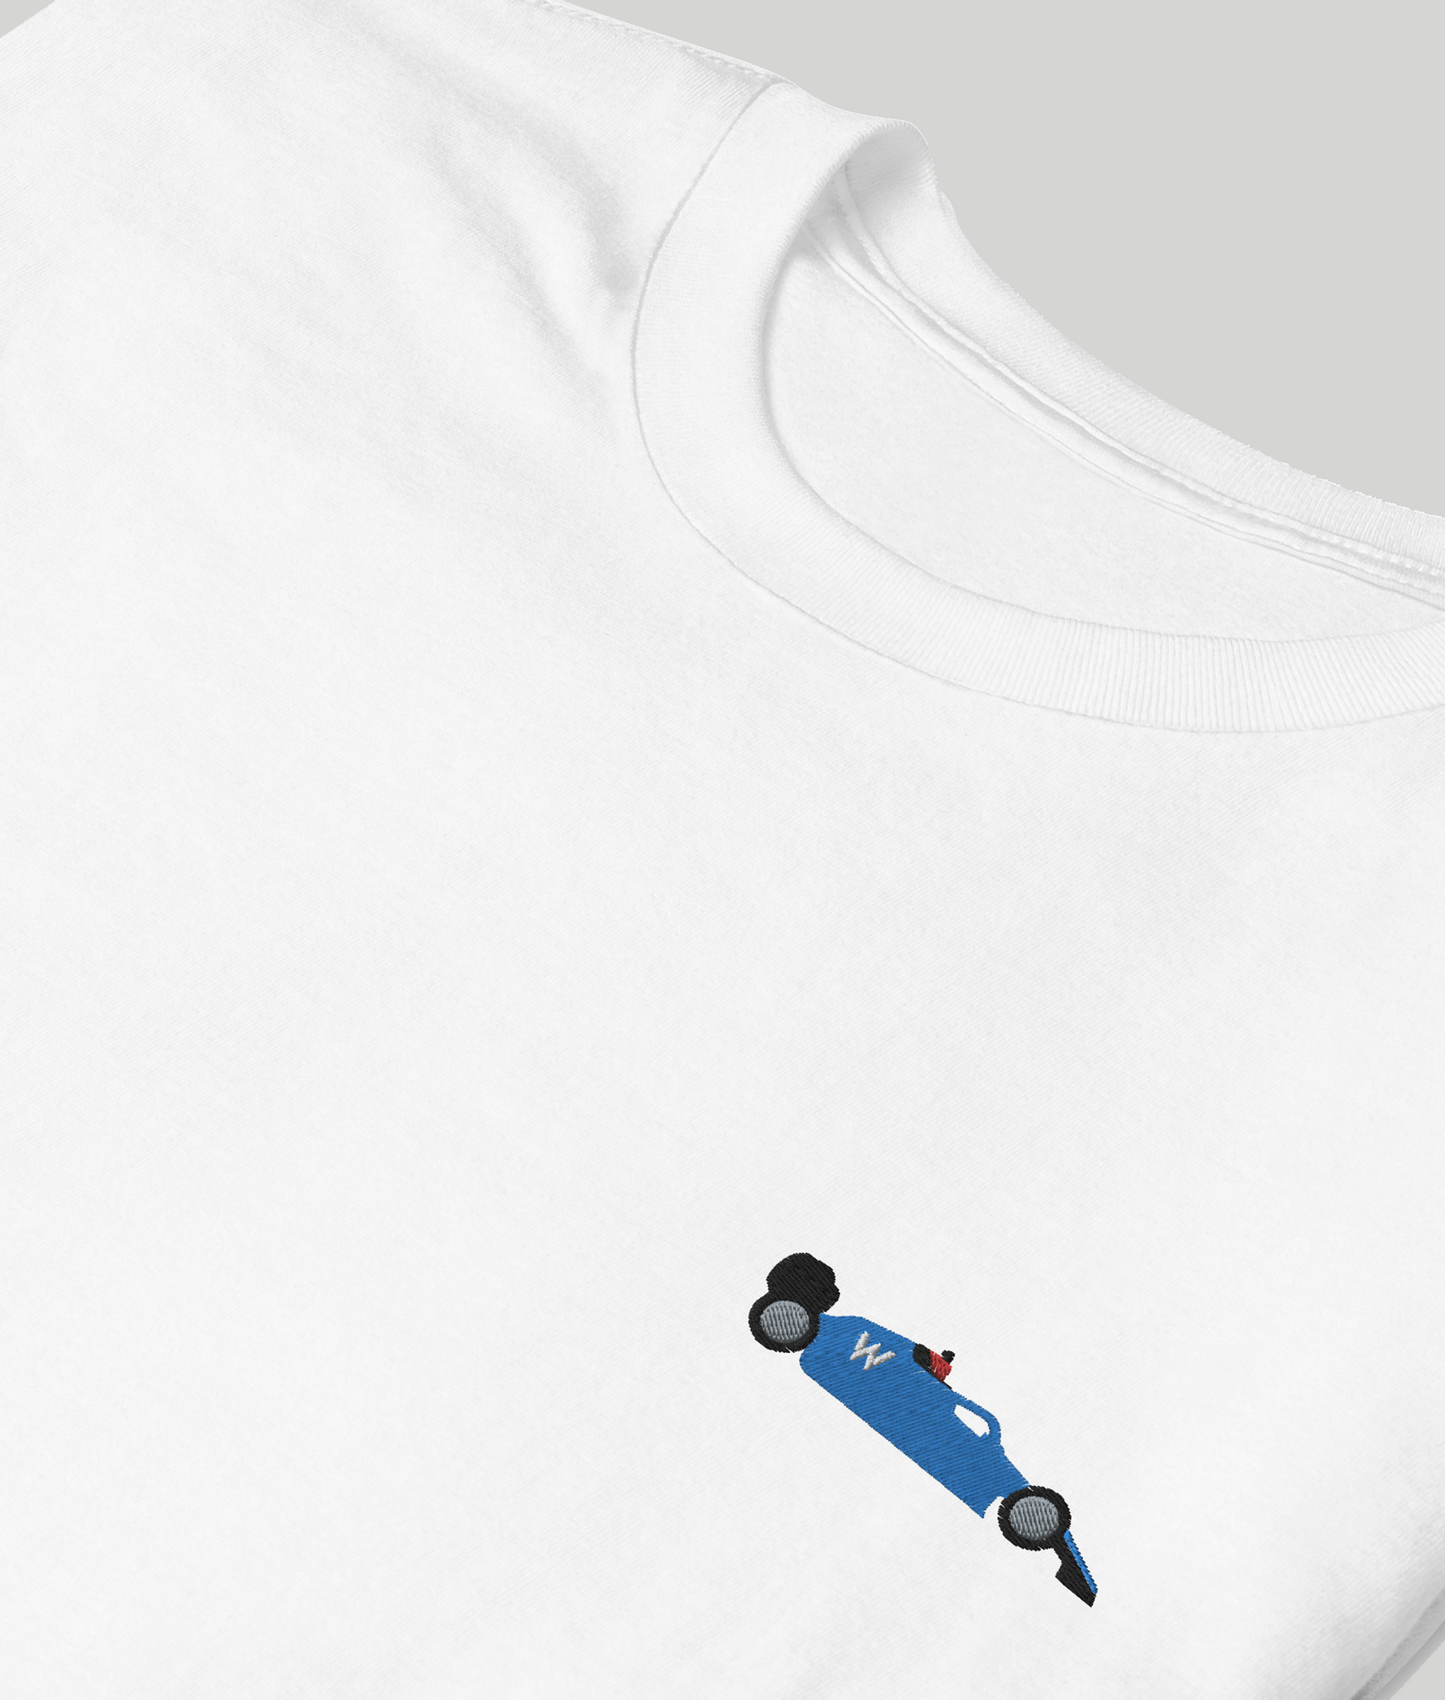 embroidered williams f1 car t-shirt